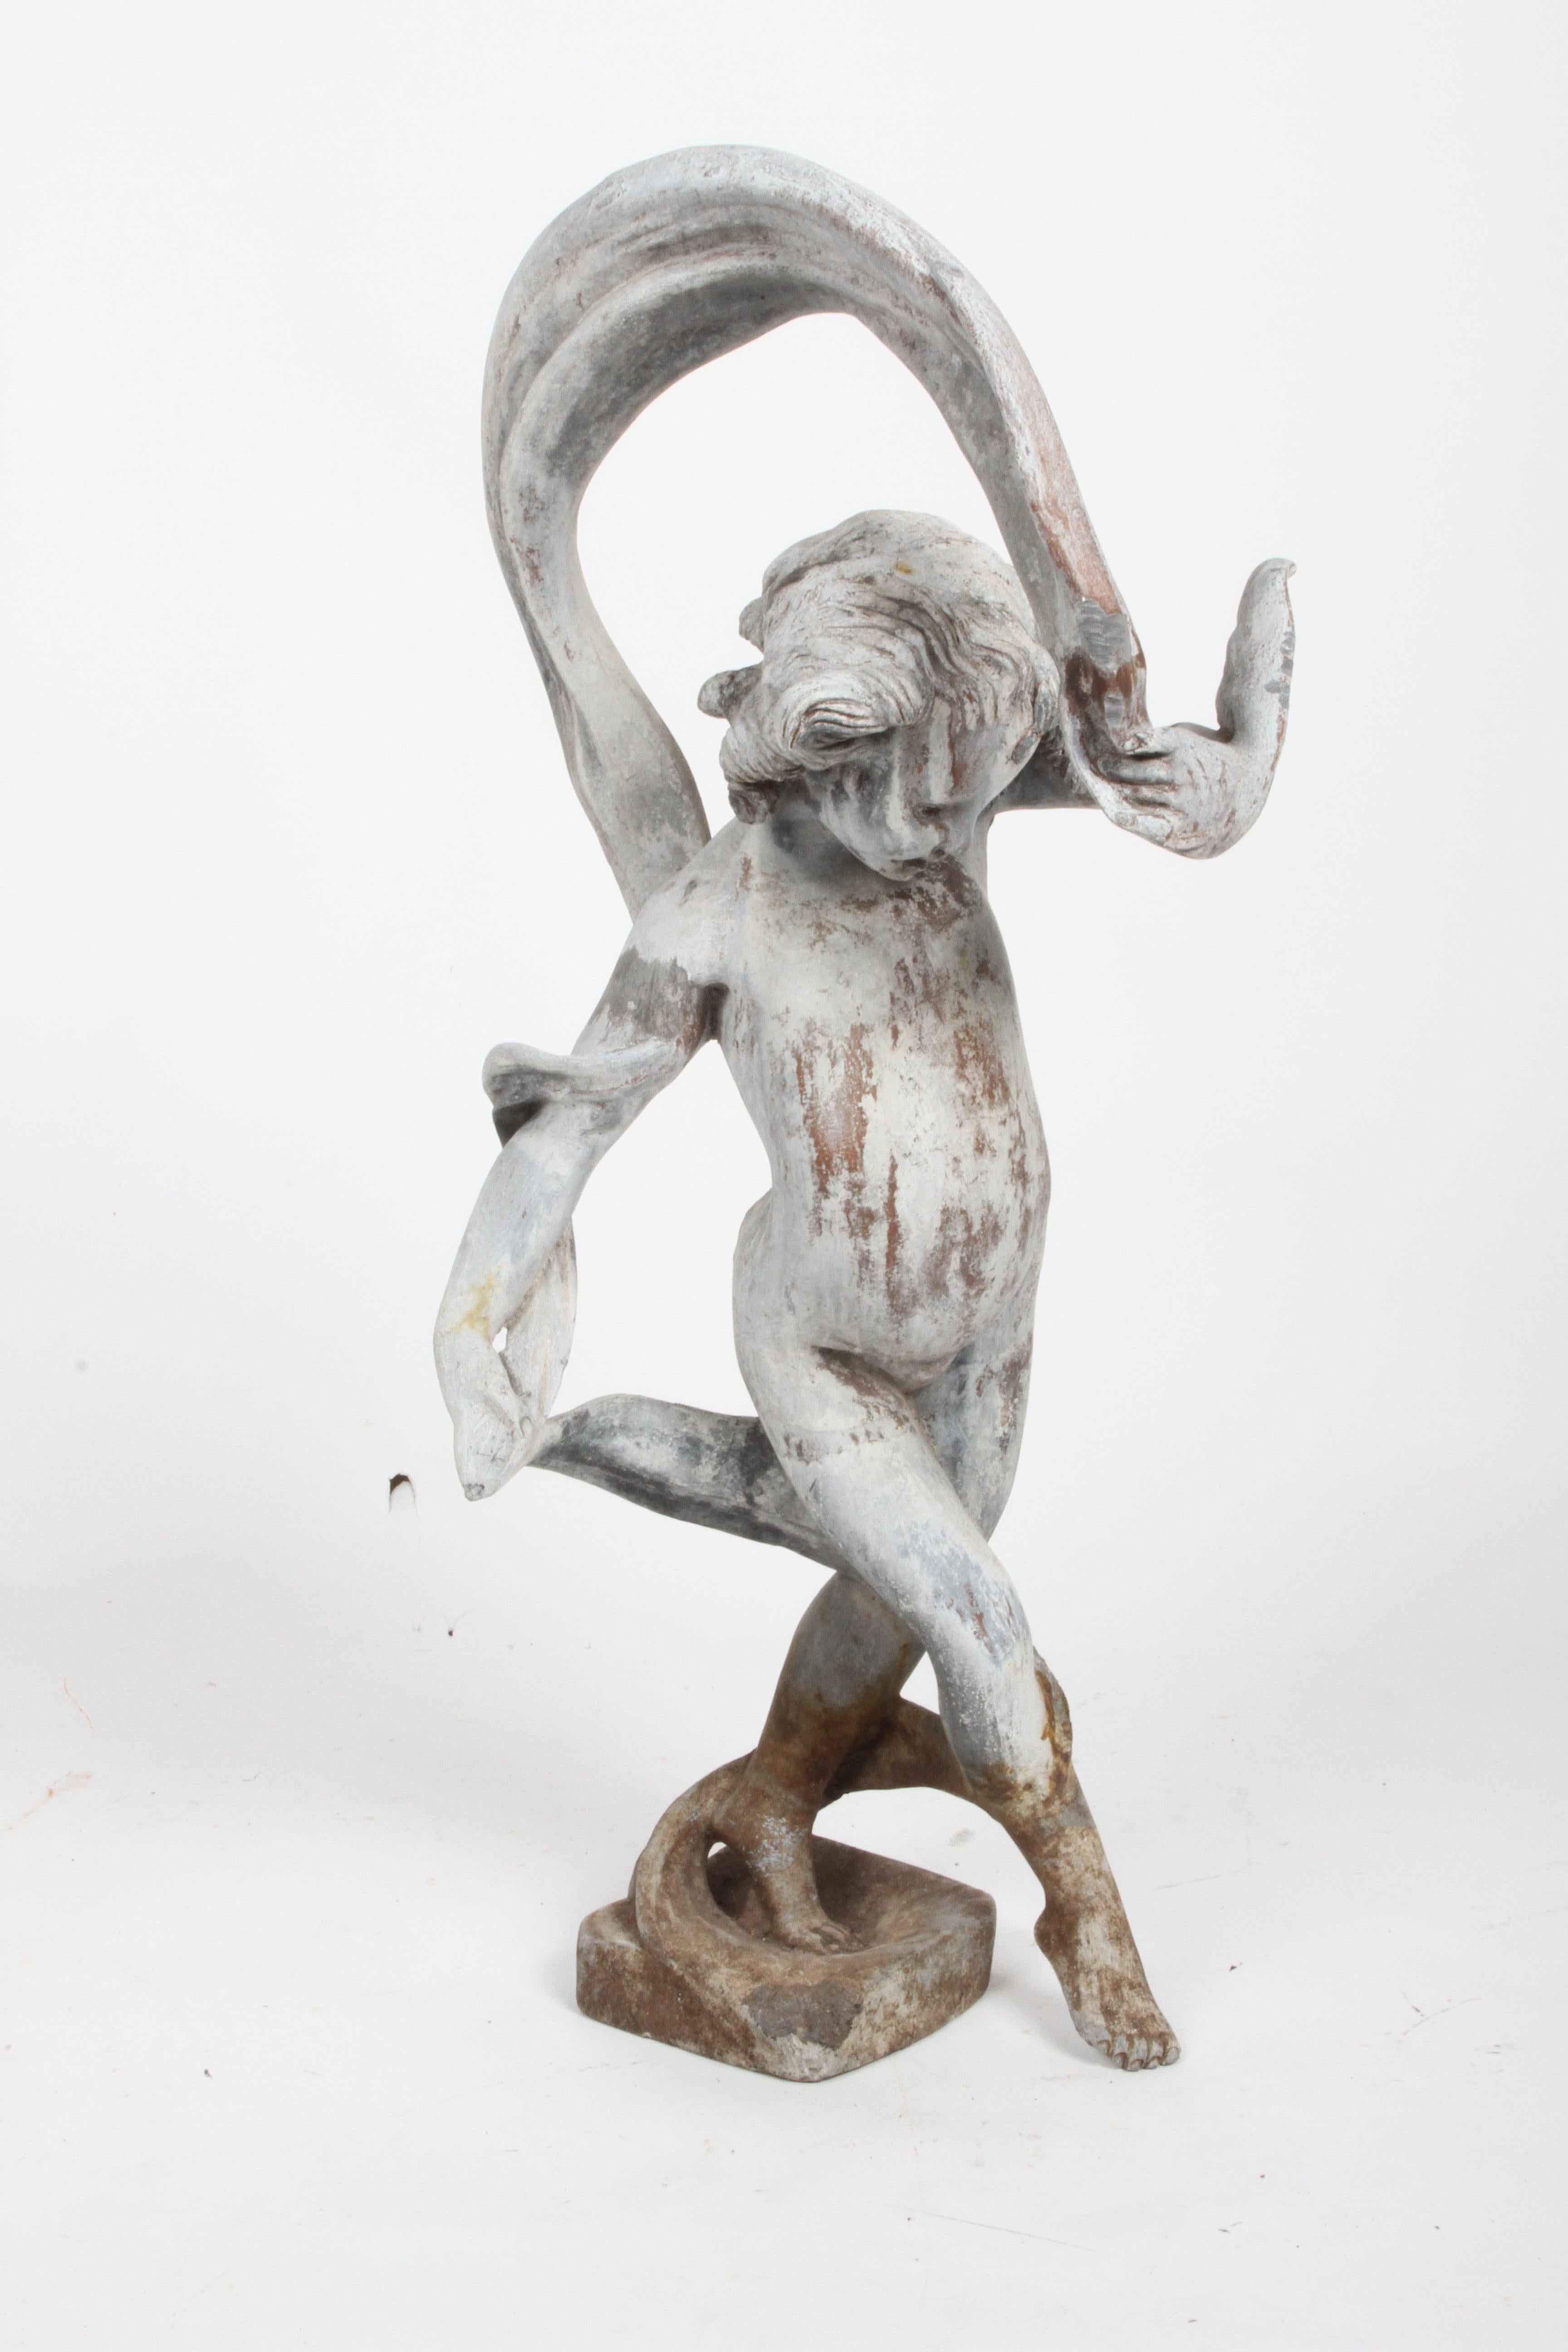 Rarely seen large antique lead garden sculpture of a dancing Putti or Cherub waving a ribbon. Nice patina to lead, some dirt or soil marks to base, few chew marks from critters and a slight opening on rear of leg. Overall shows very well, expected